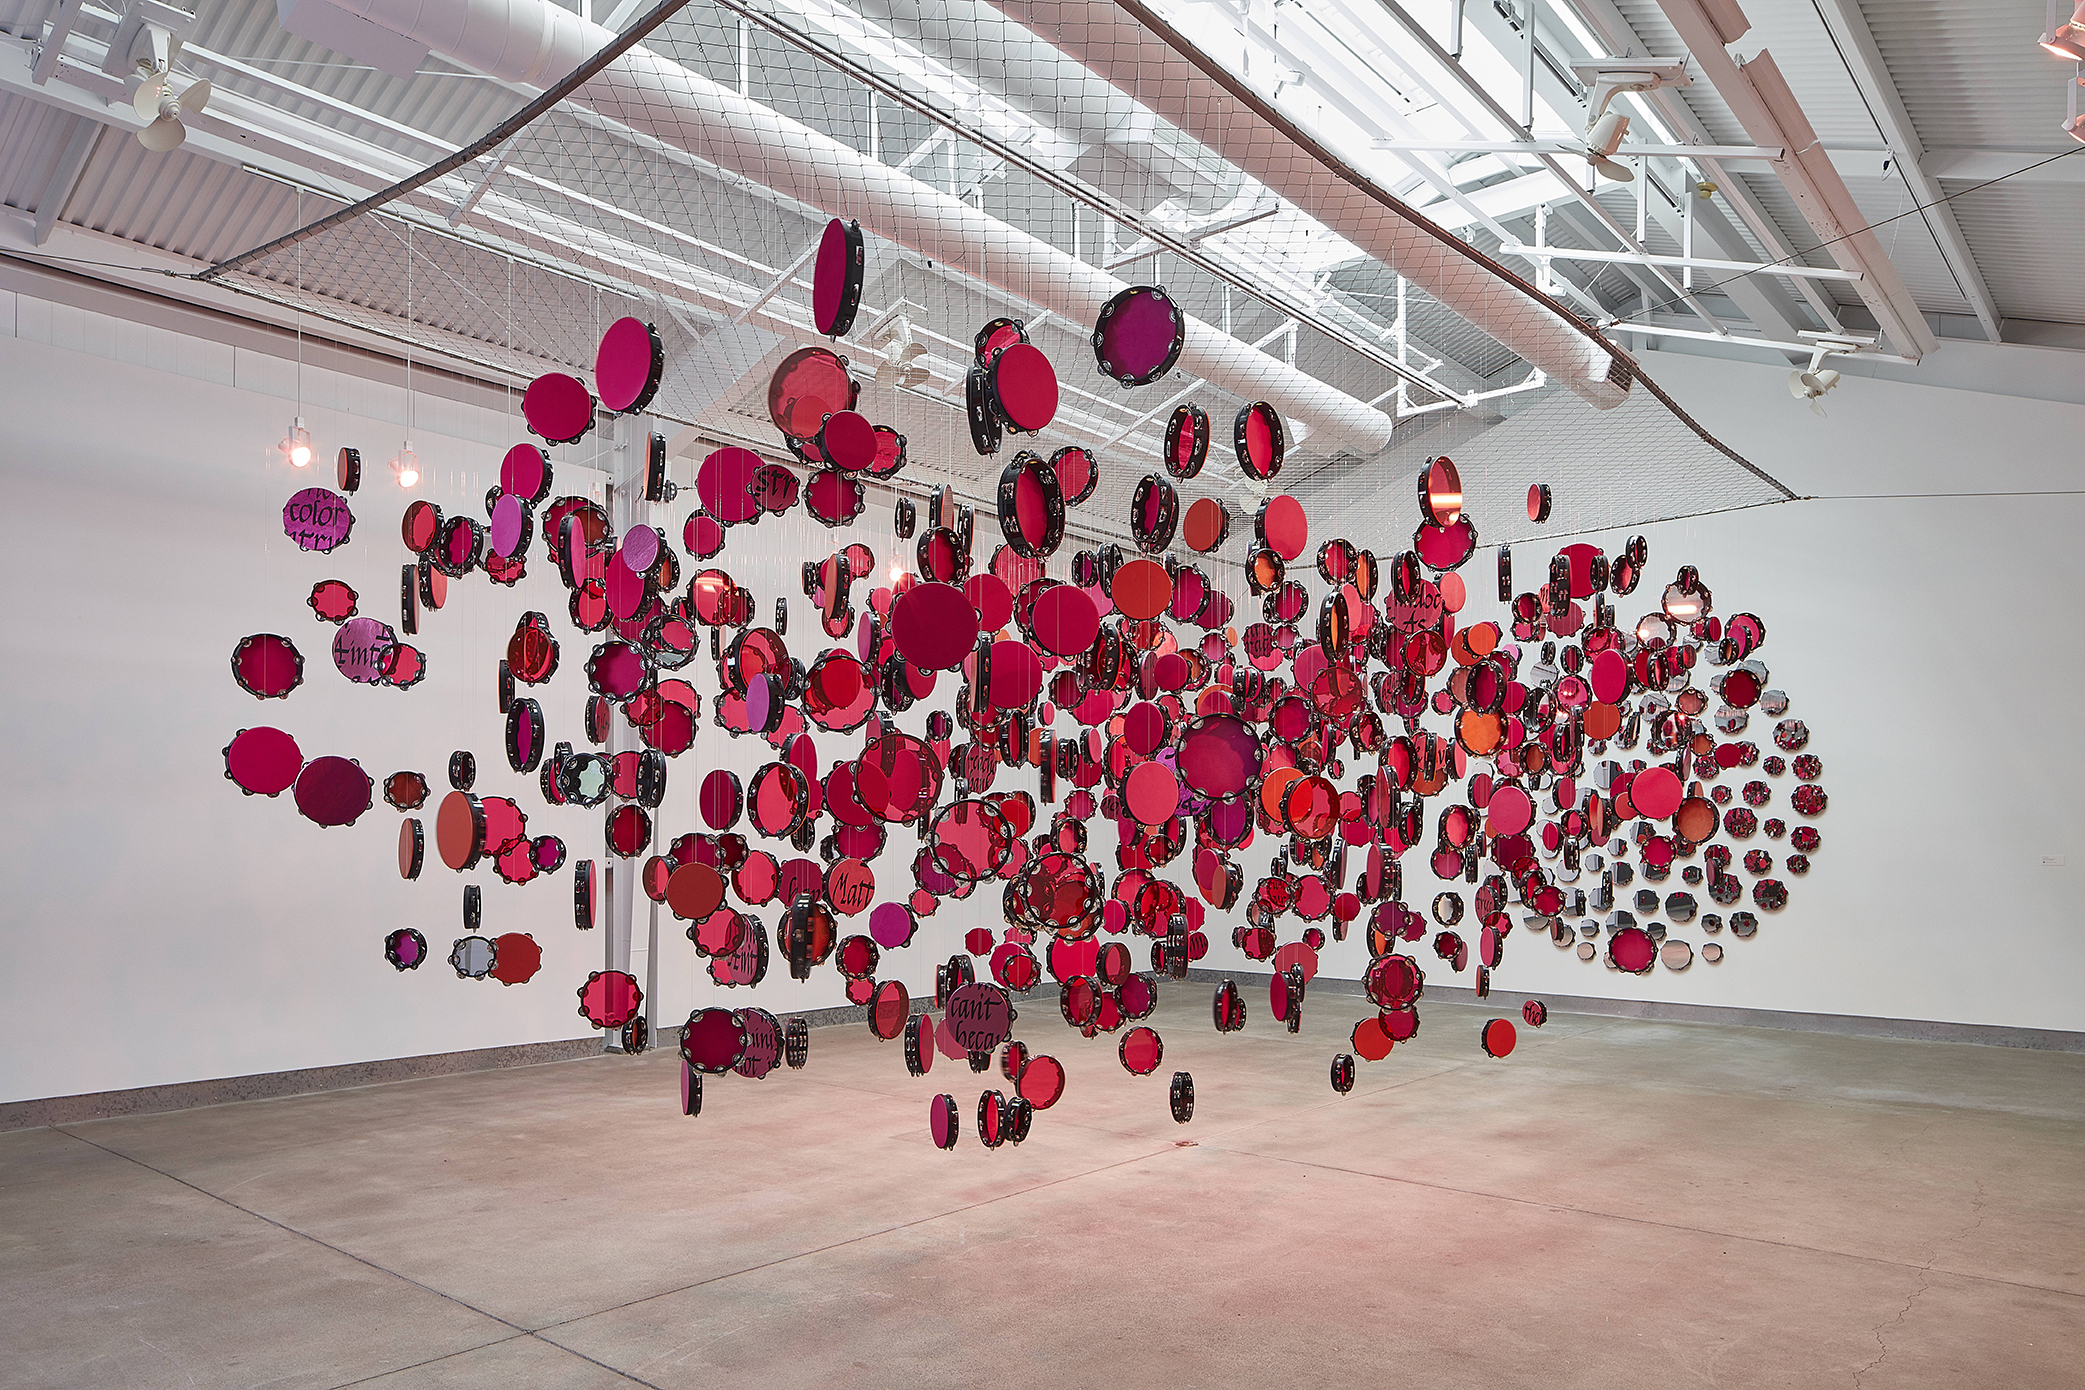 Lava Thomas, Resistance Reverb: Movements 1 & 2, 2018. Tambourines, leather, suede, Plexiglas, mirrored acrylic, acrylic paint, monofilament wire, S-hooks, aluminum grid, steel, fans, and lights. Approx. 102 × 156 × 312 in.